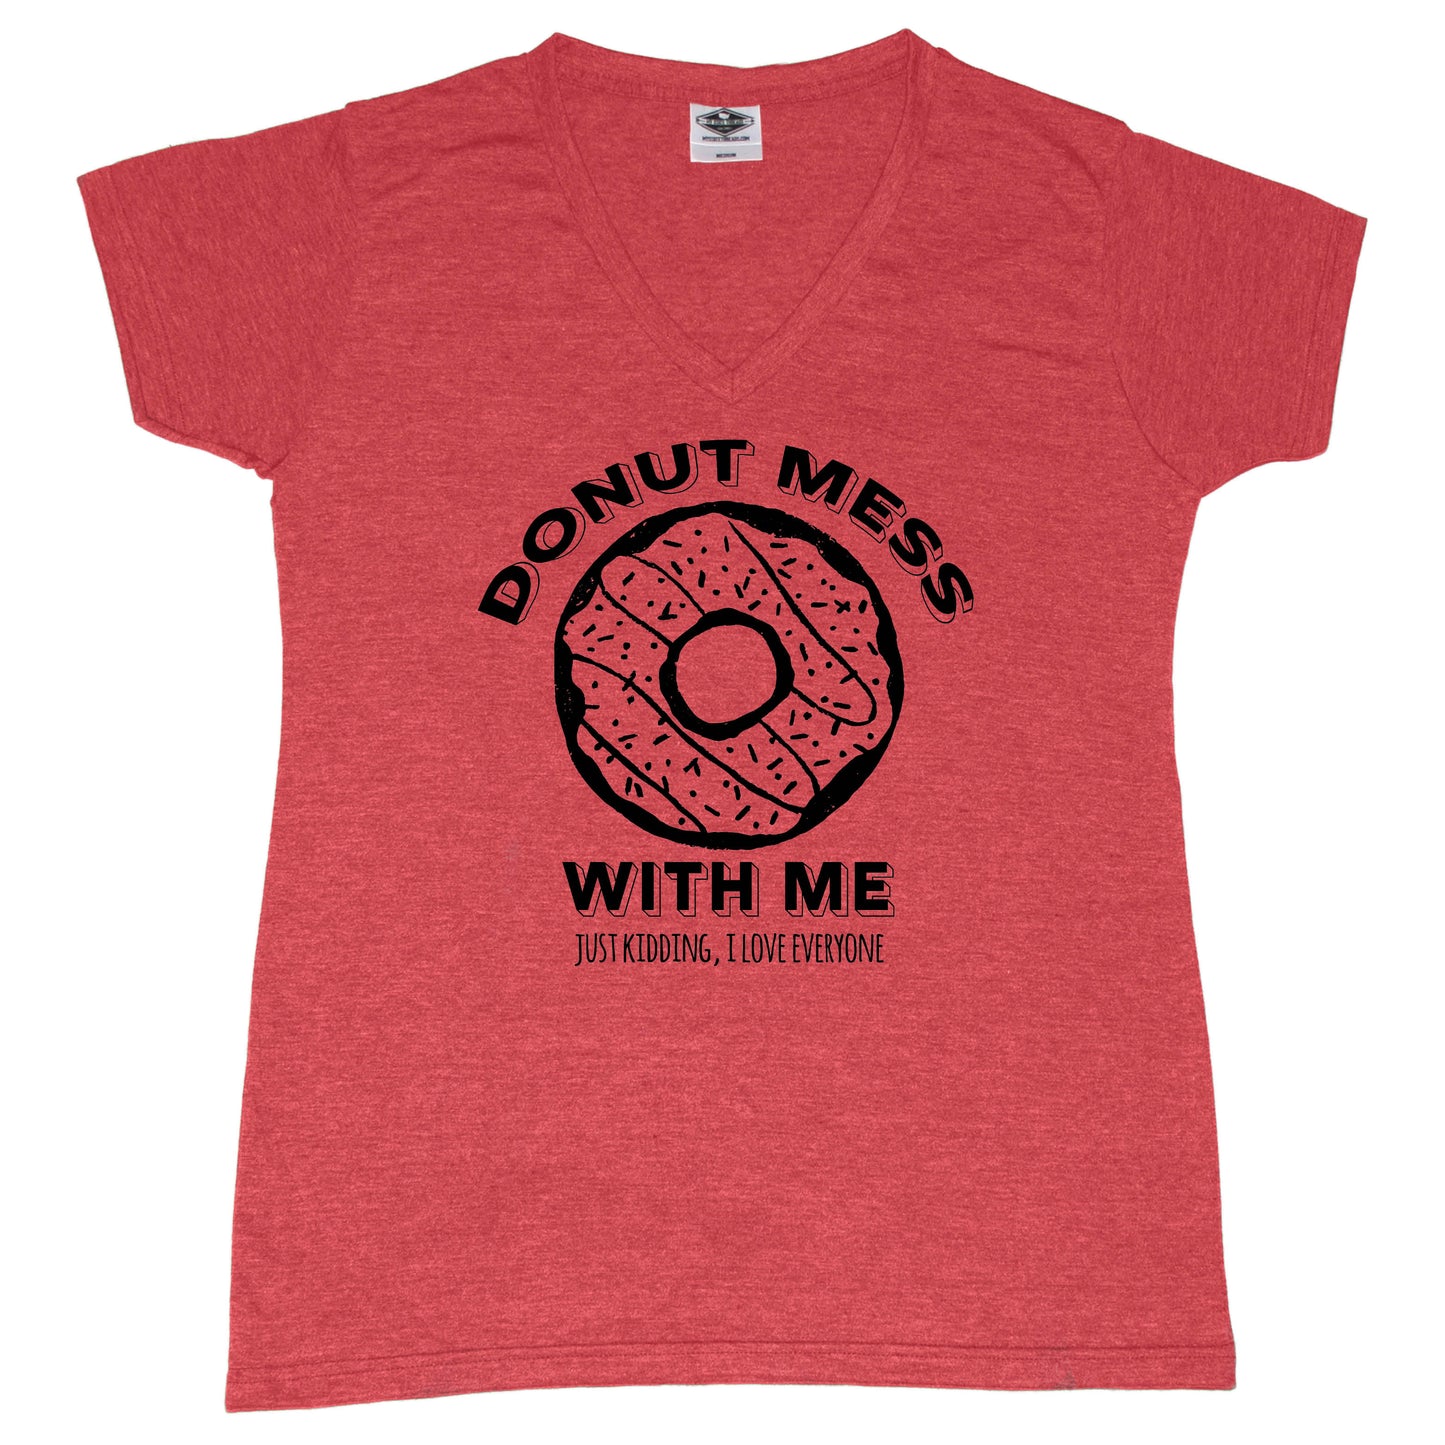 Donut Mess With Me - Ladies' Tee